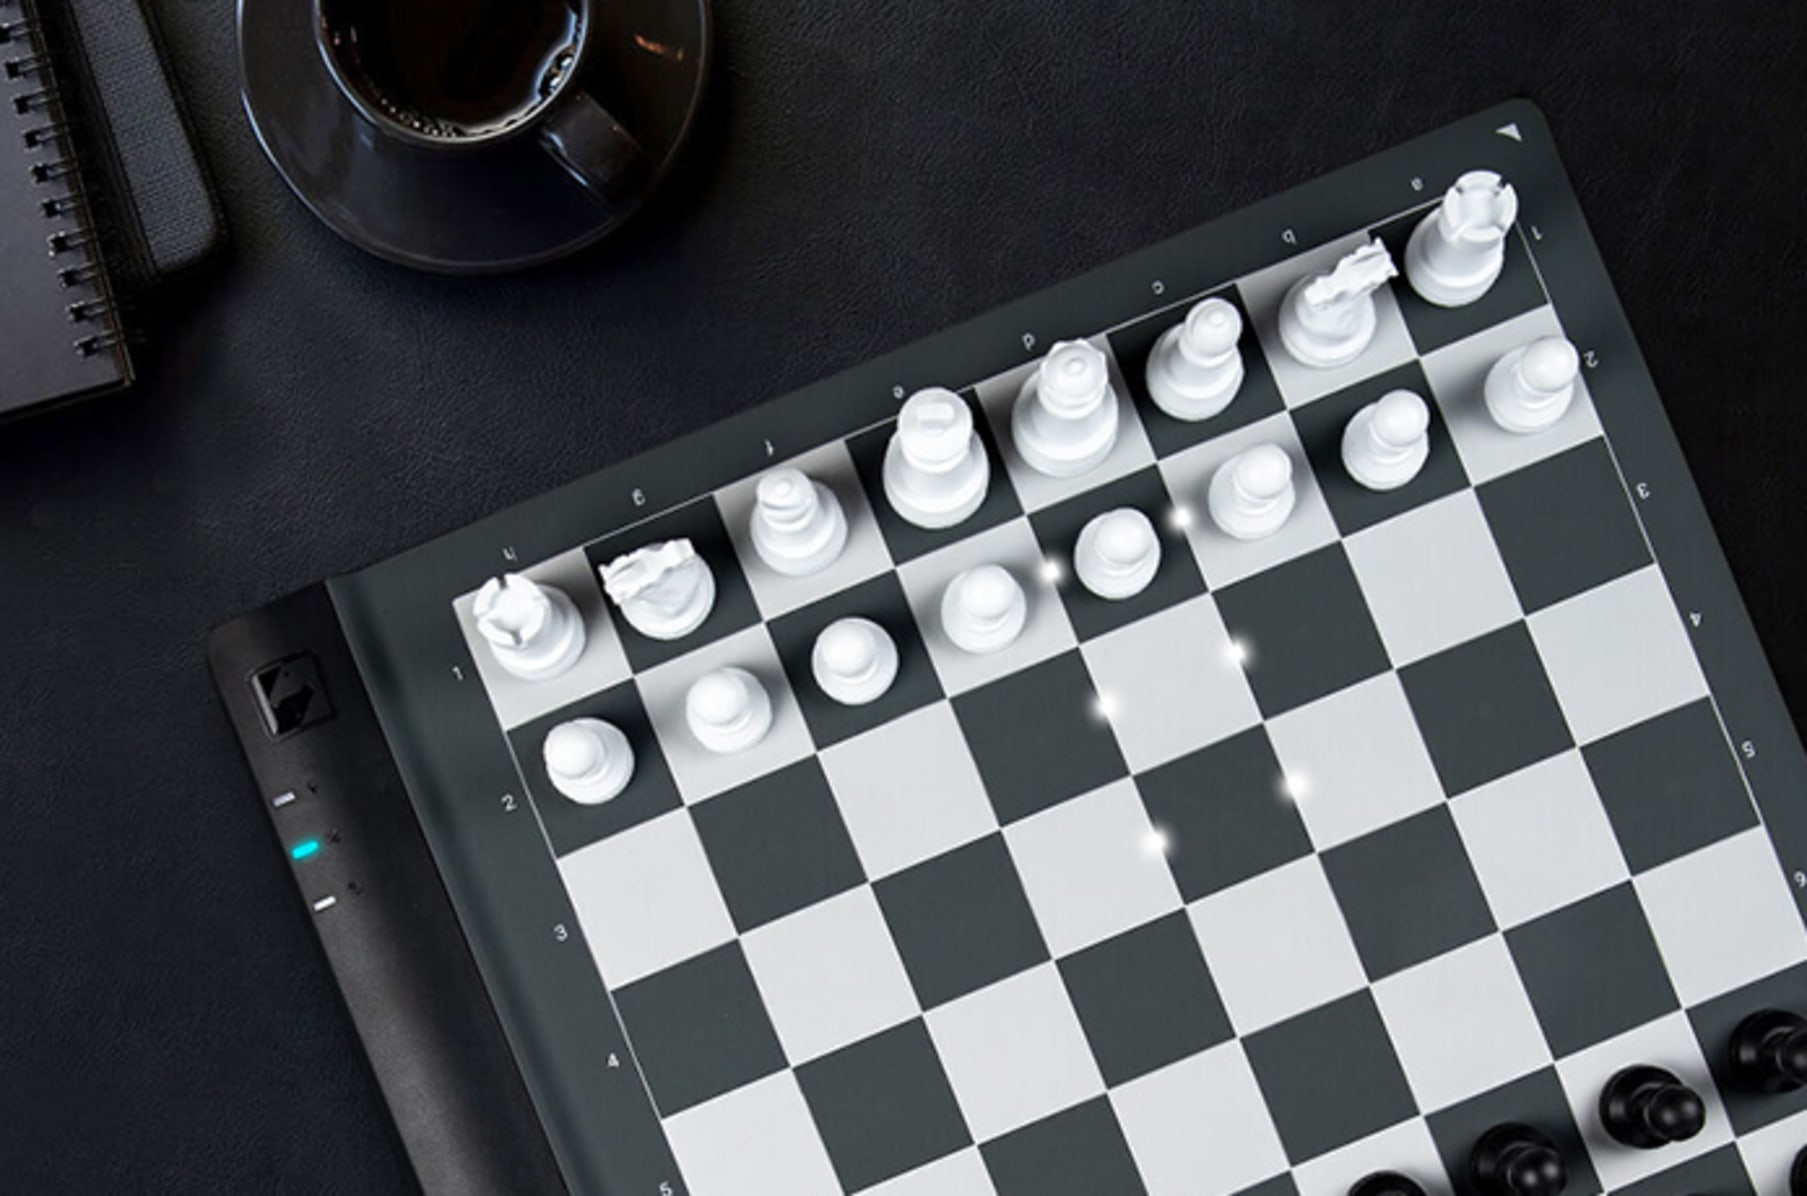 Embarcadero Tech on X: #Embarcadero Cool Apps Contest Entry: Chess  Openings Wizard. Check out this cross platform #FireMonkey app for planning  your chess play openings. Be sure to check out the video